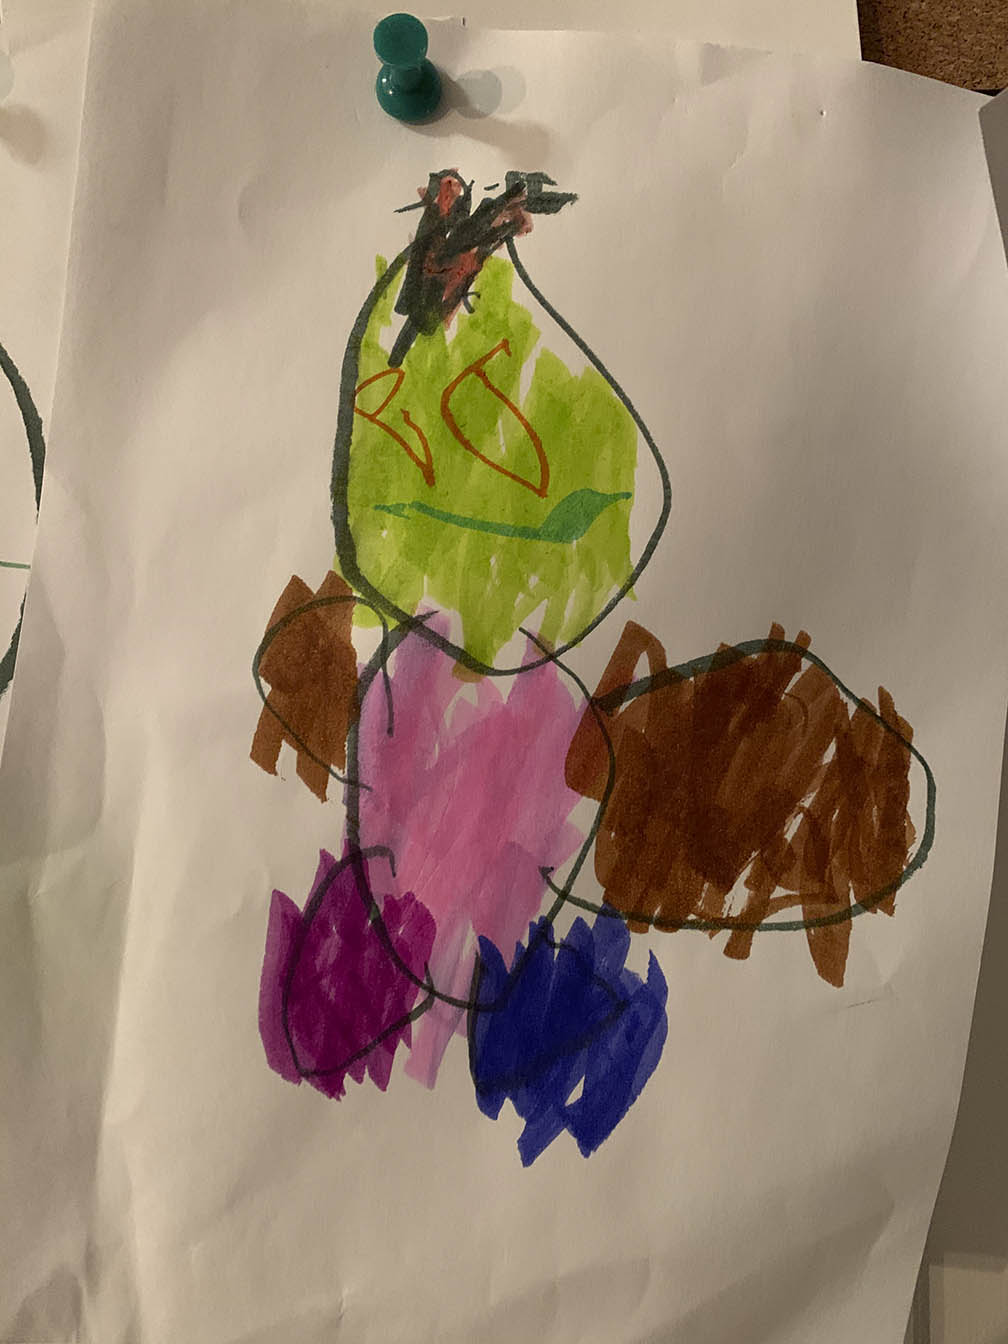 original kids drawing of a person with green face